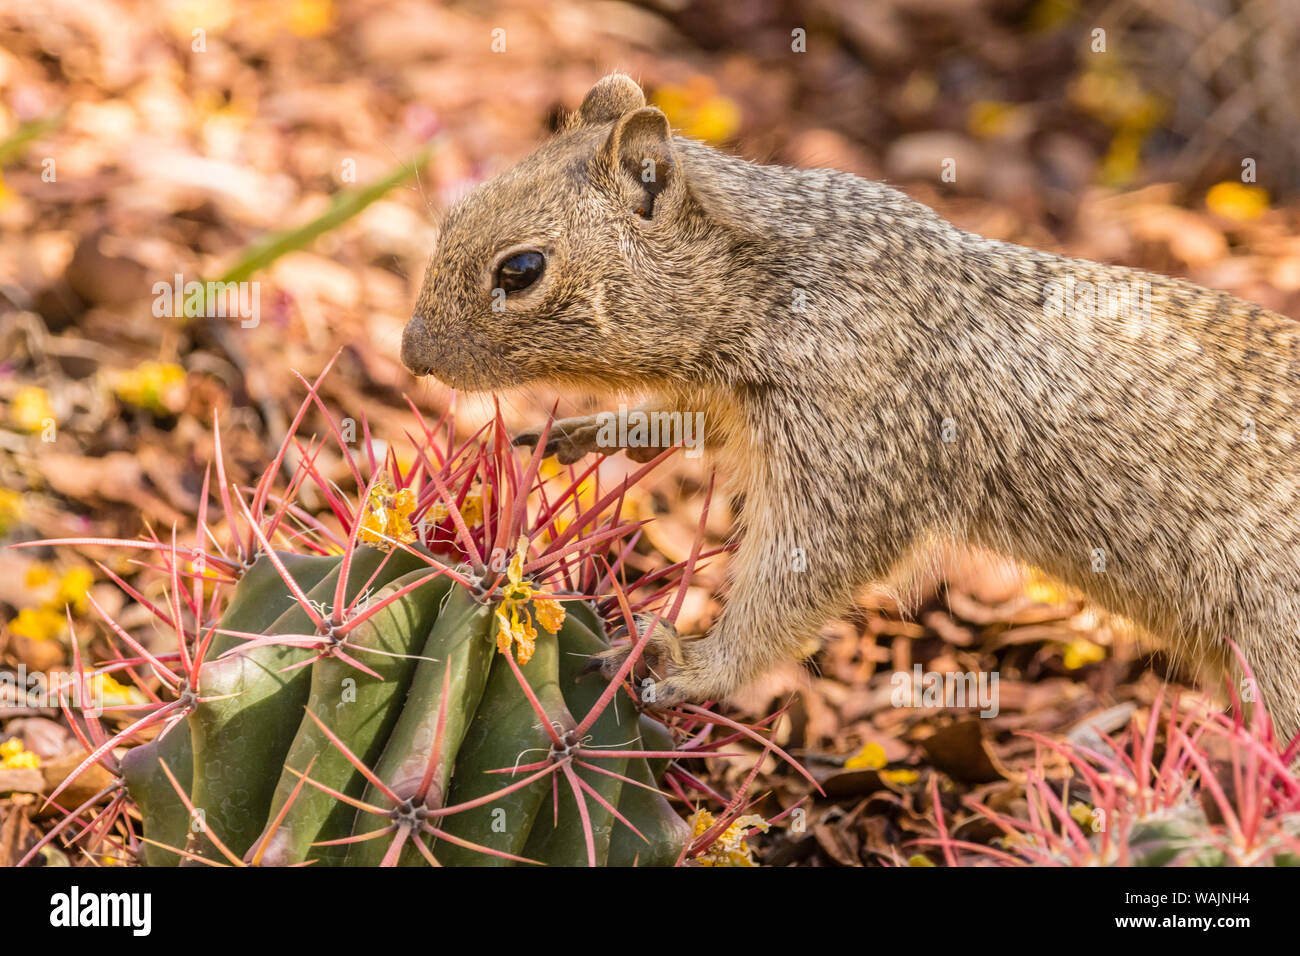 USA, Arizona, Sonoran Desert. Rock squirrel perched on cactus spines. Credit as: Cathy and Gordon Illg / Jaynes Gallery / DanitaDelimont.com Stock Photo